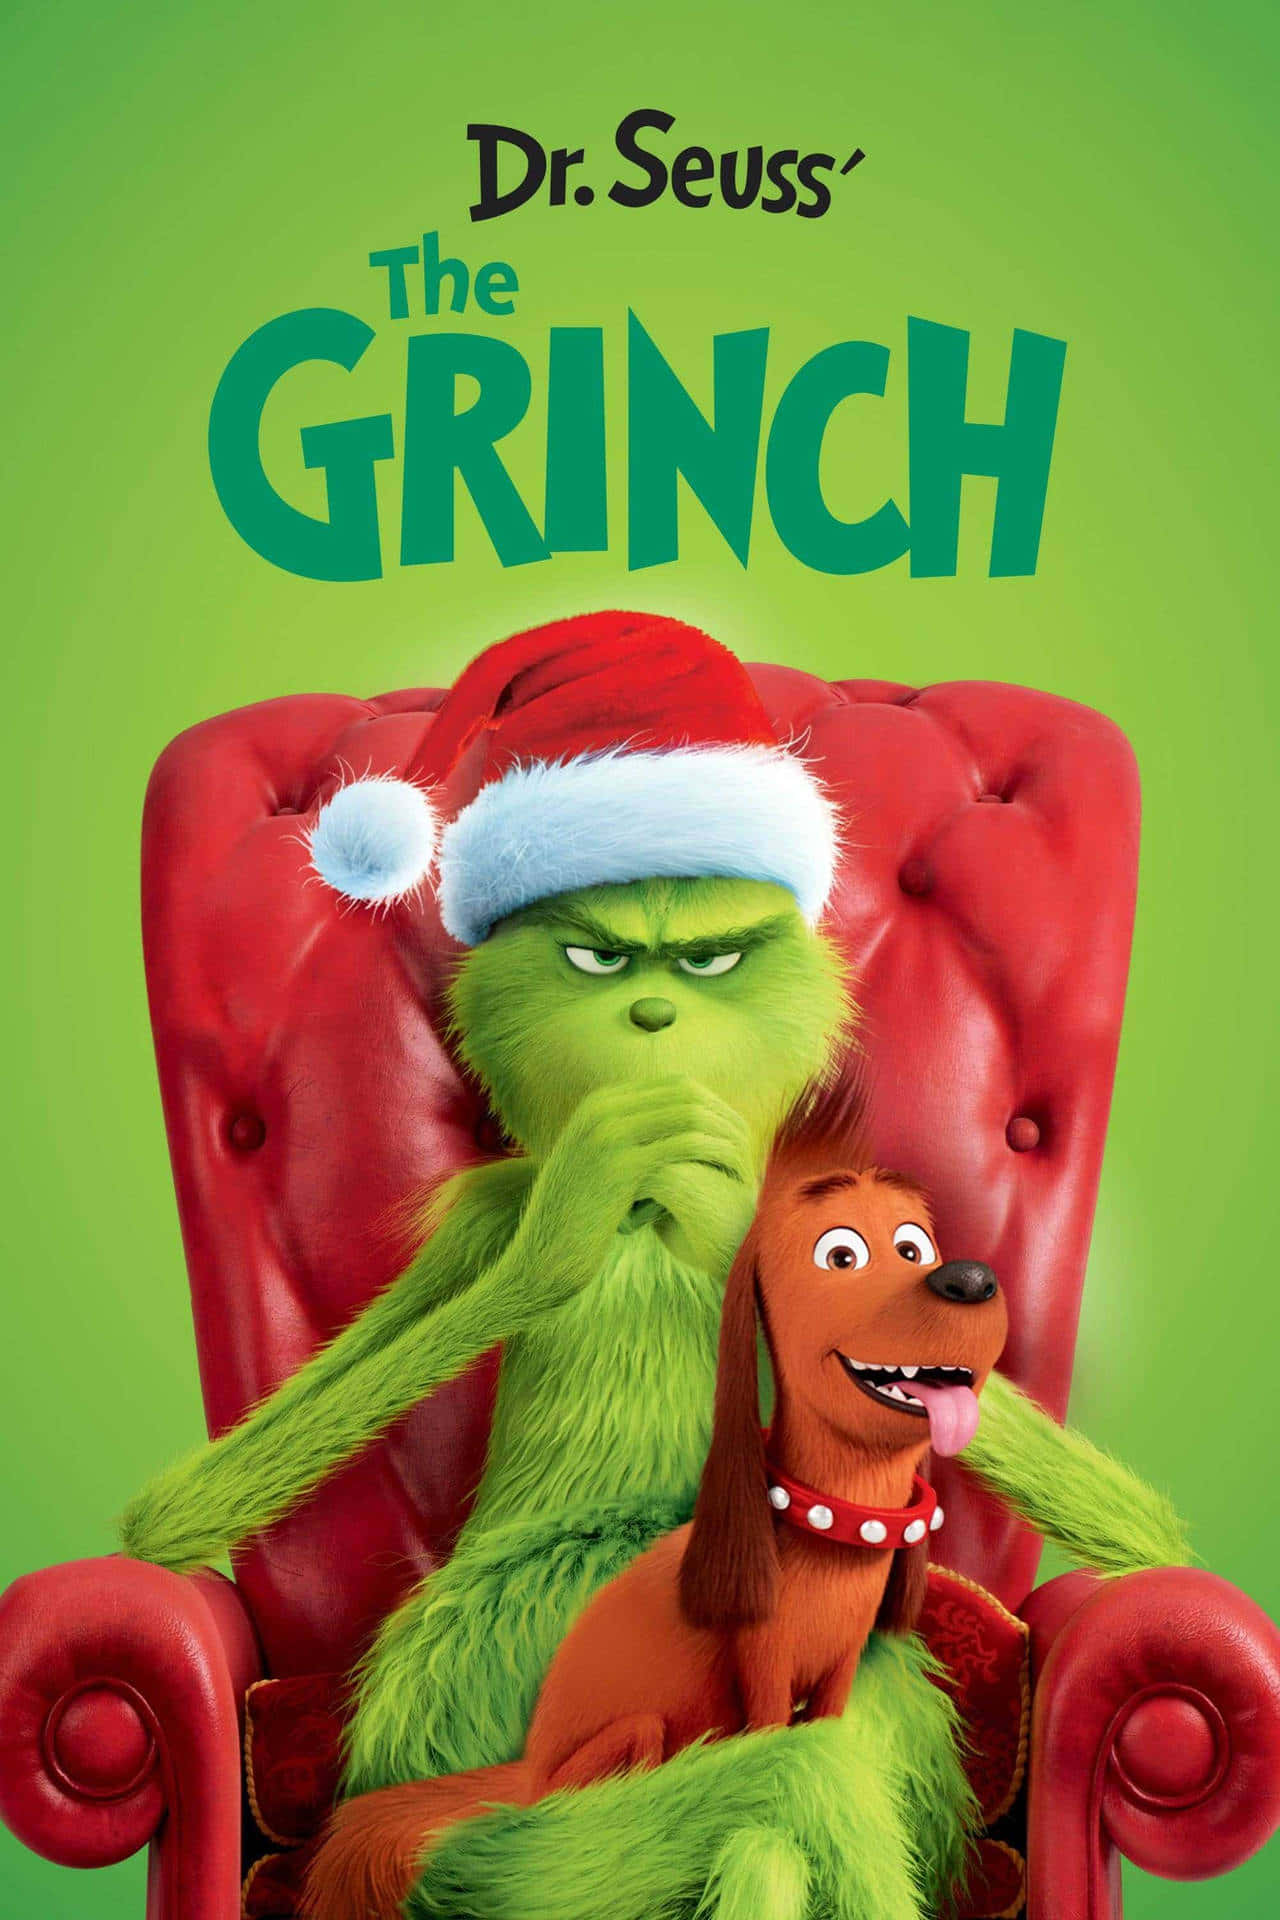 "Officially the Worst Christmas Grinch of all-time"